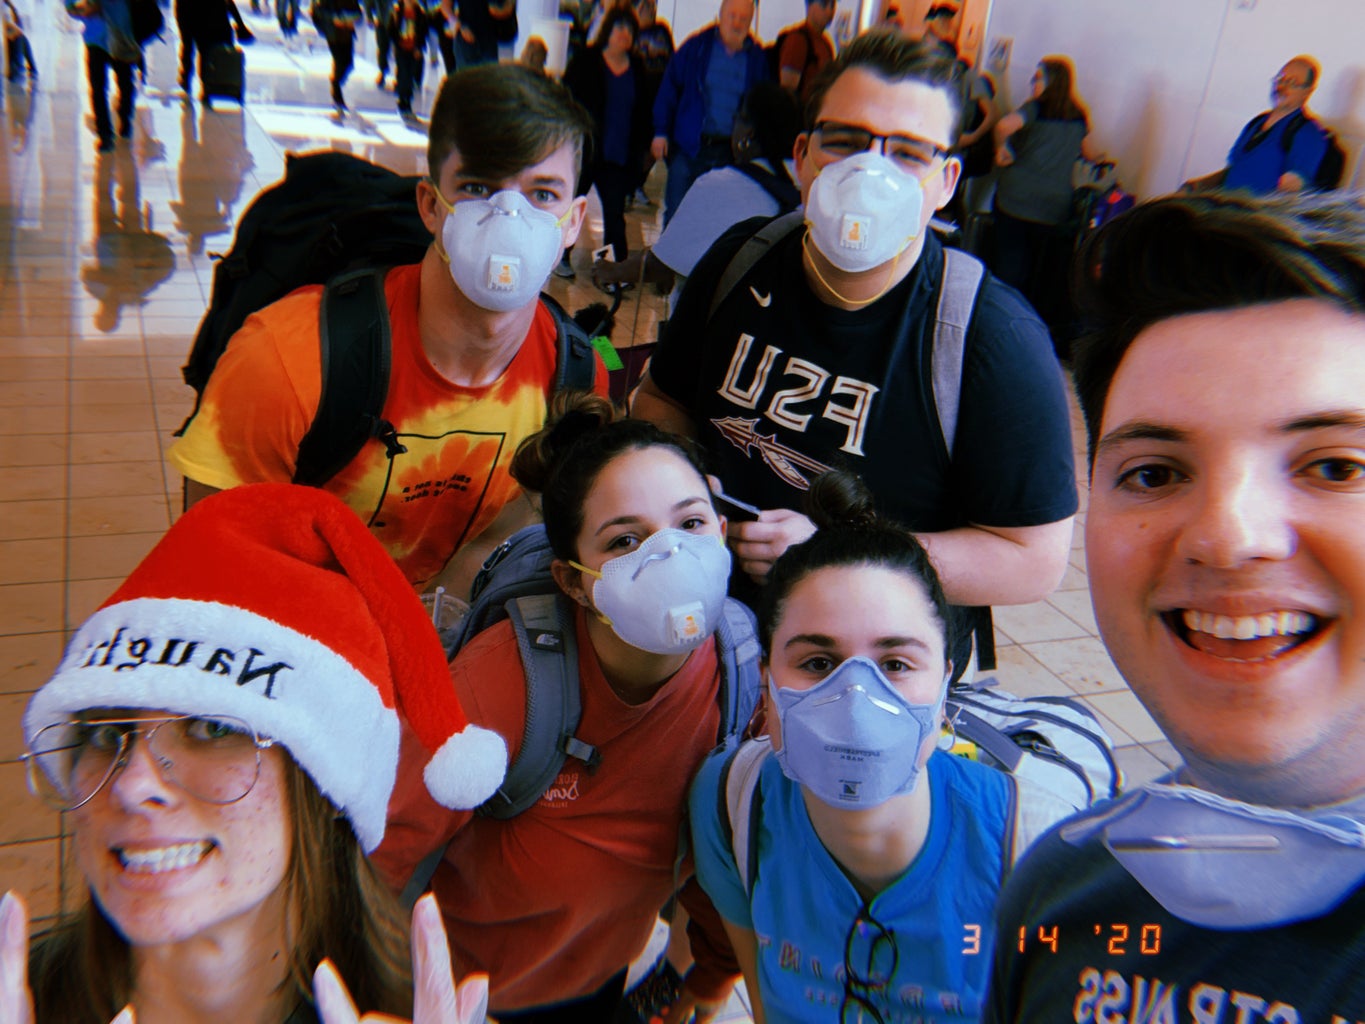 My friends and I in masks at the airport